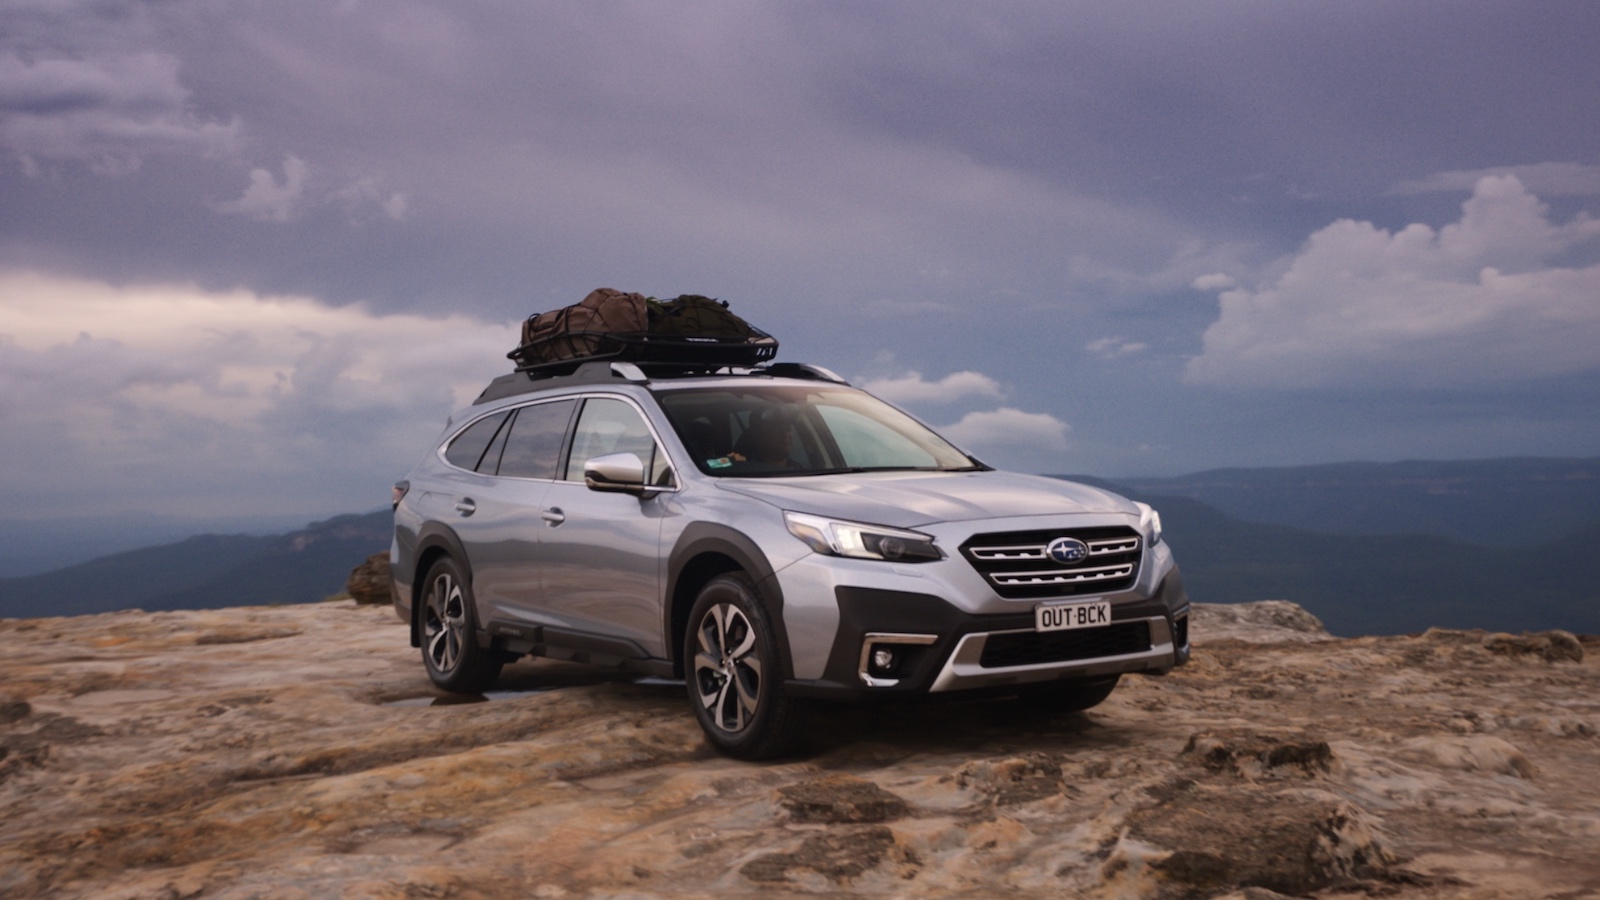 Subaru's new Outback campaign is a time capsule for Aussie drivers